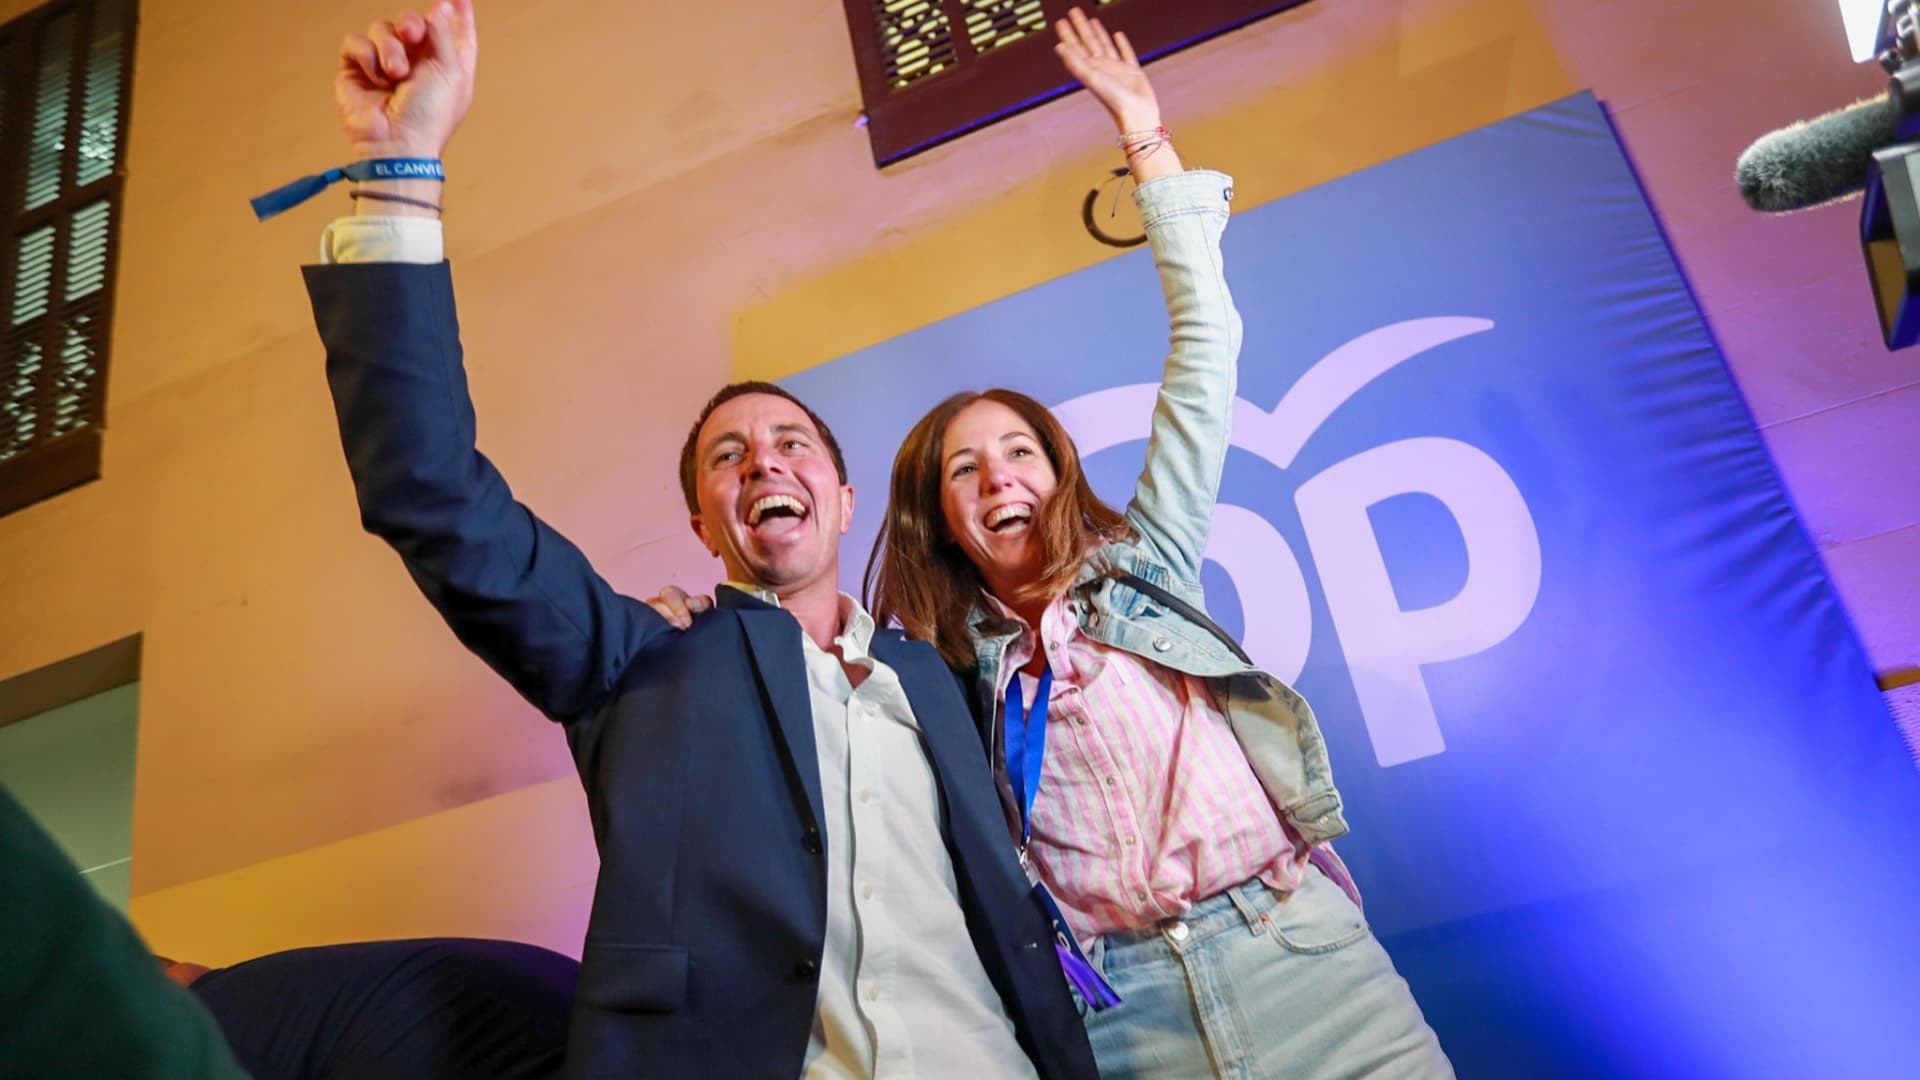 Spain’s conservative PP elbows Socialists out in regional elections